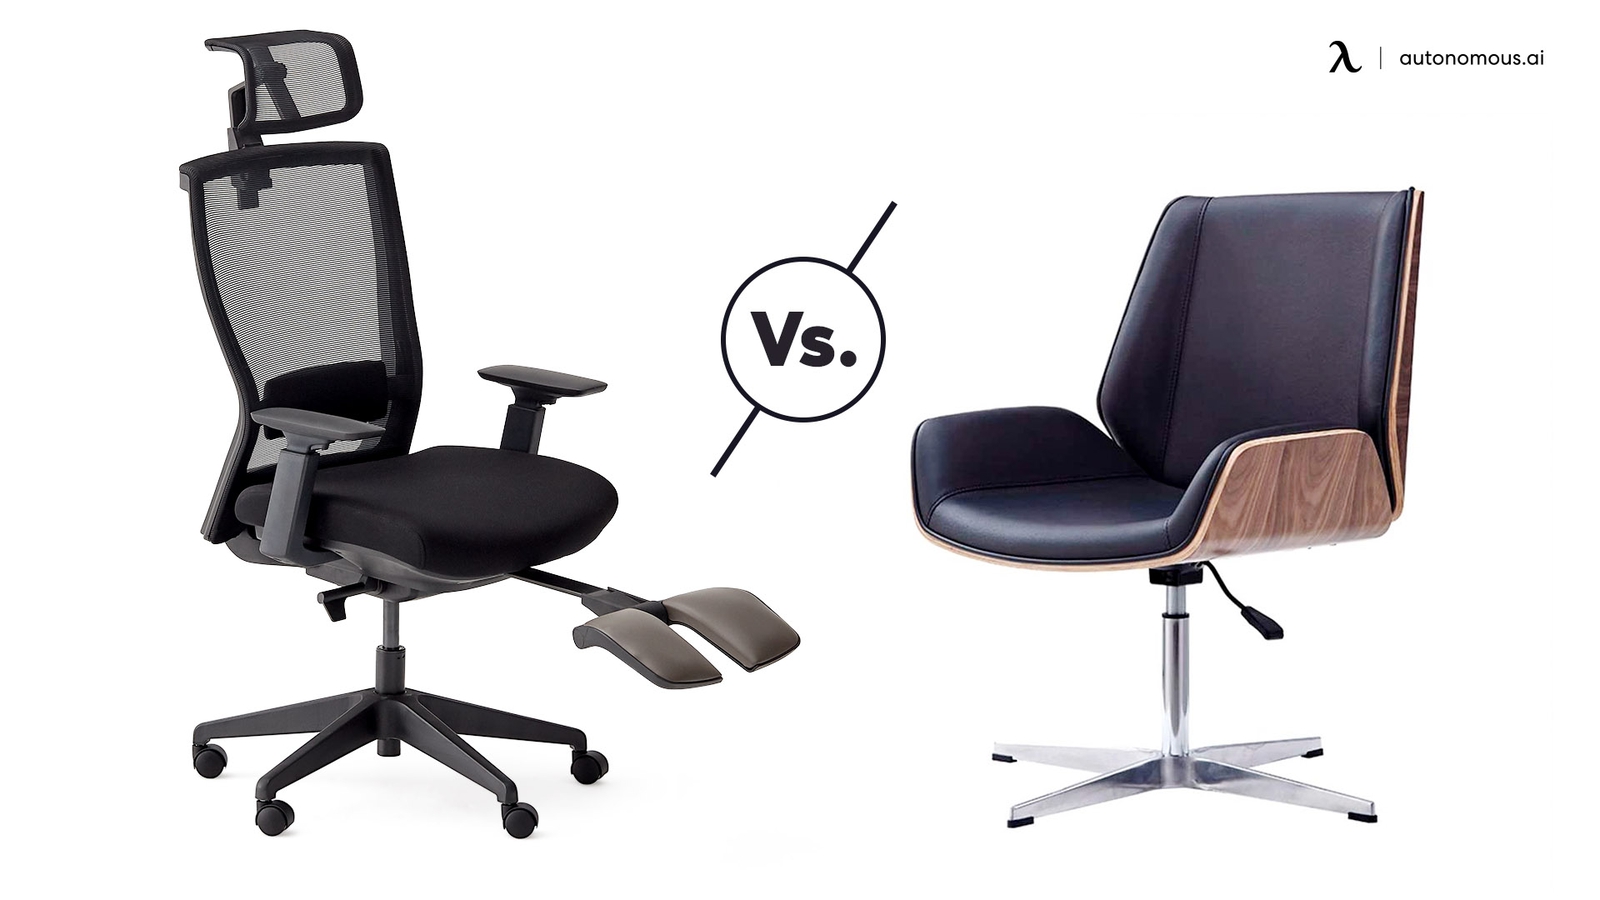 Ergonomic Chair Vs Office Chair: What Are the Differences?